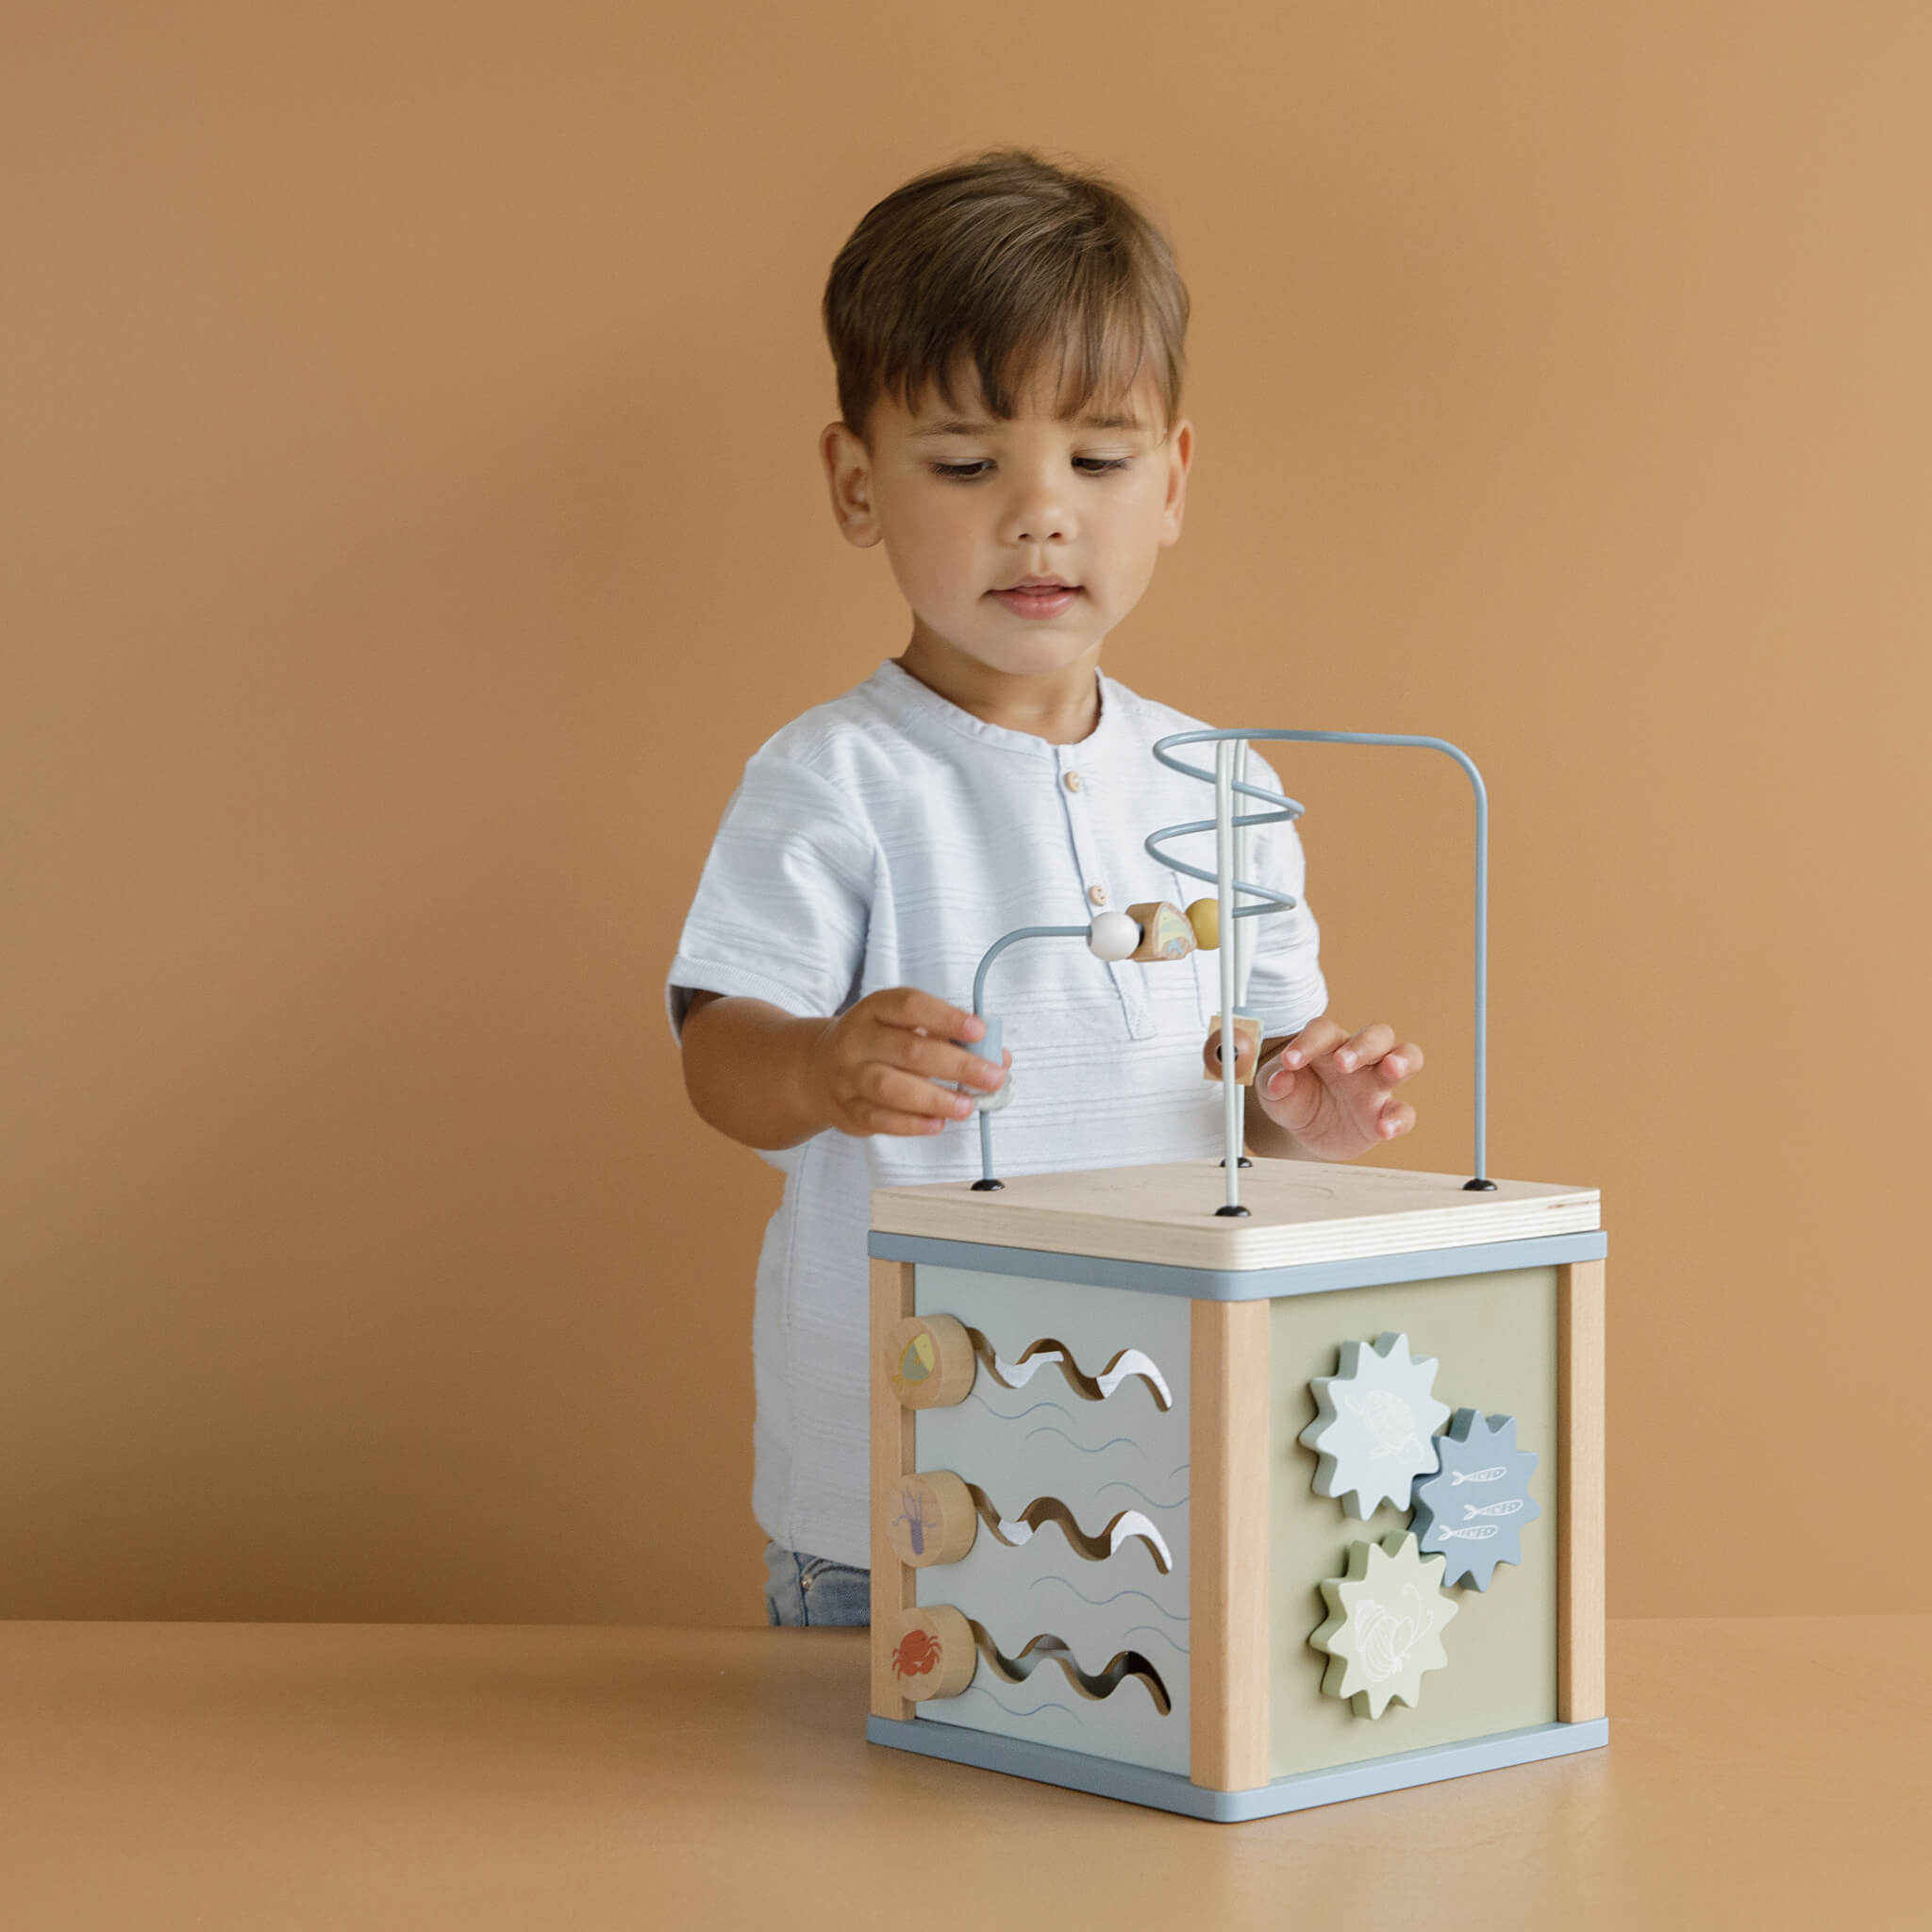 Boy Playing with Little Dutch Wooden Activity Cube Toy in Ocean Design